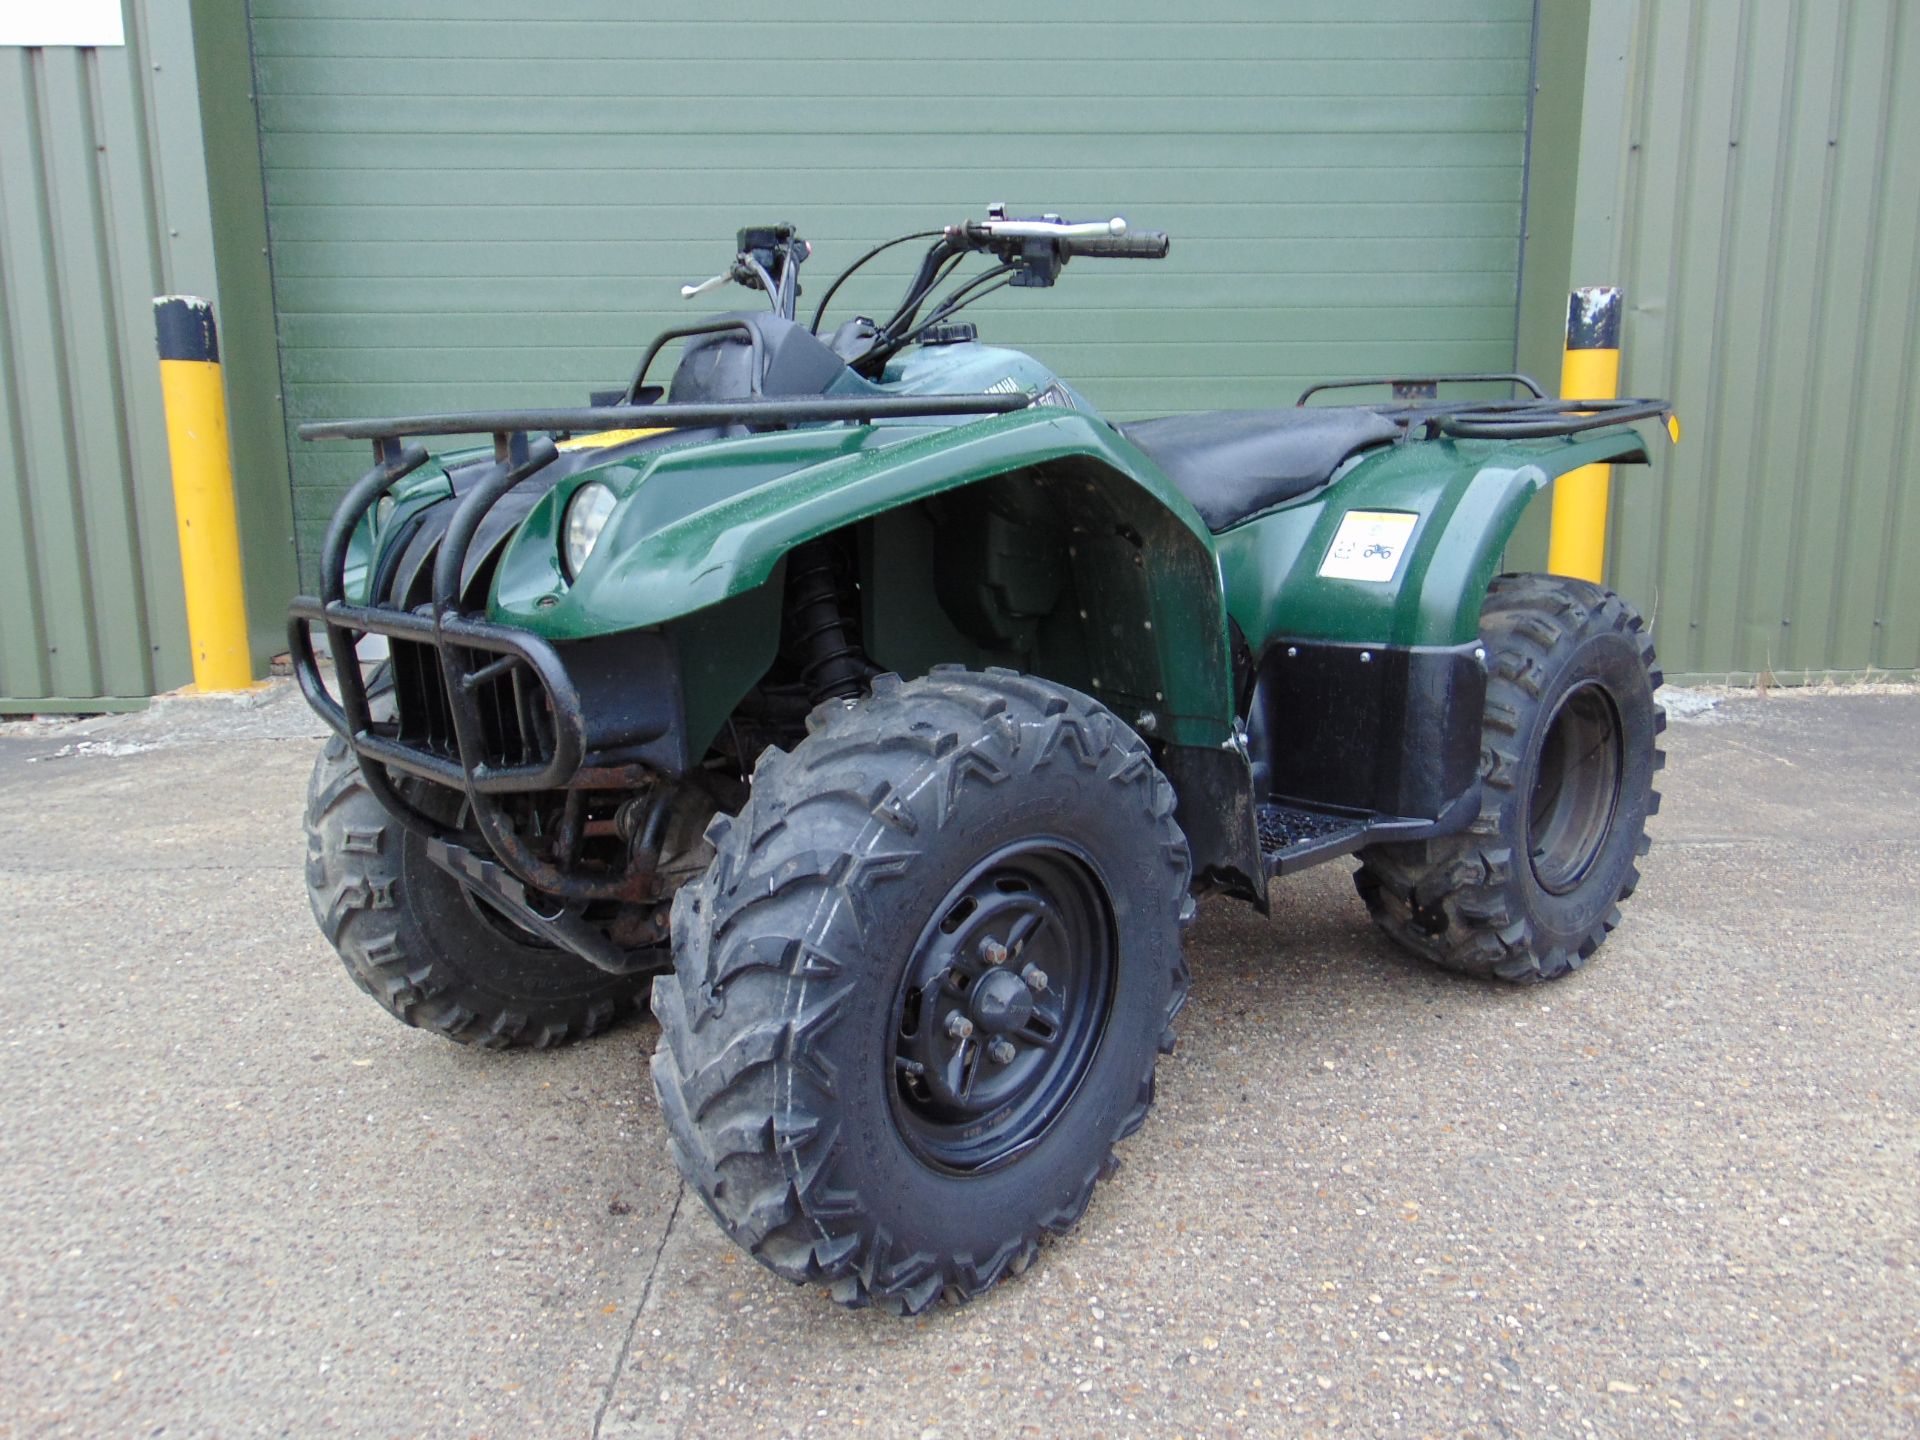 Yamaha Kodiak 400 Ultramatic 4 x 4 Quad Bike with front and rear carriers